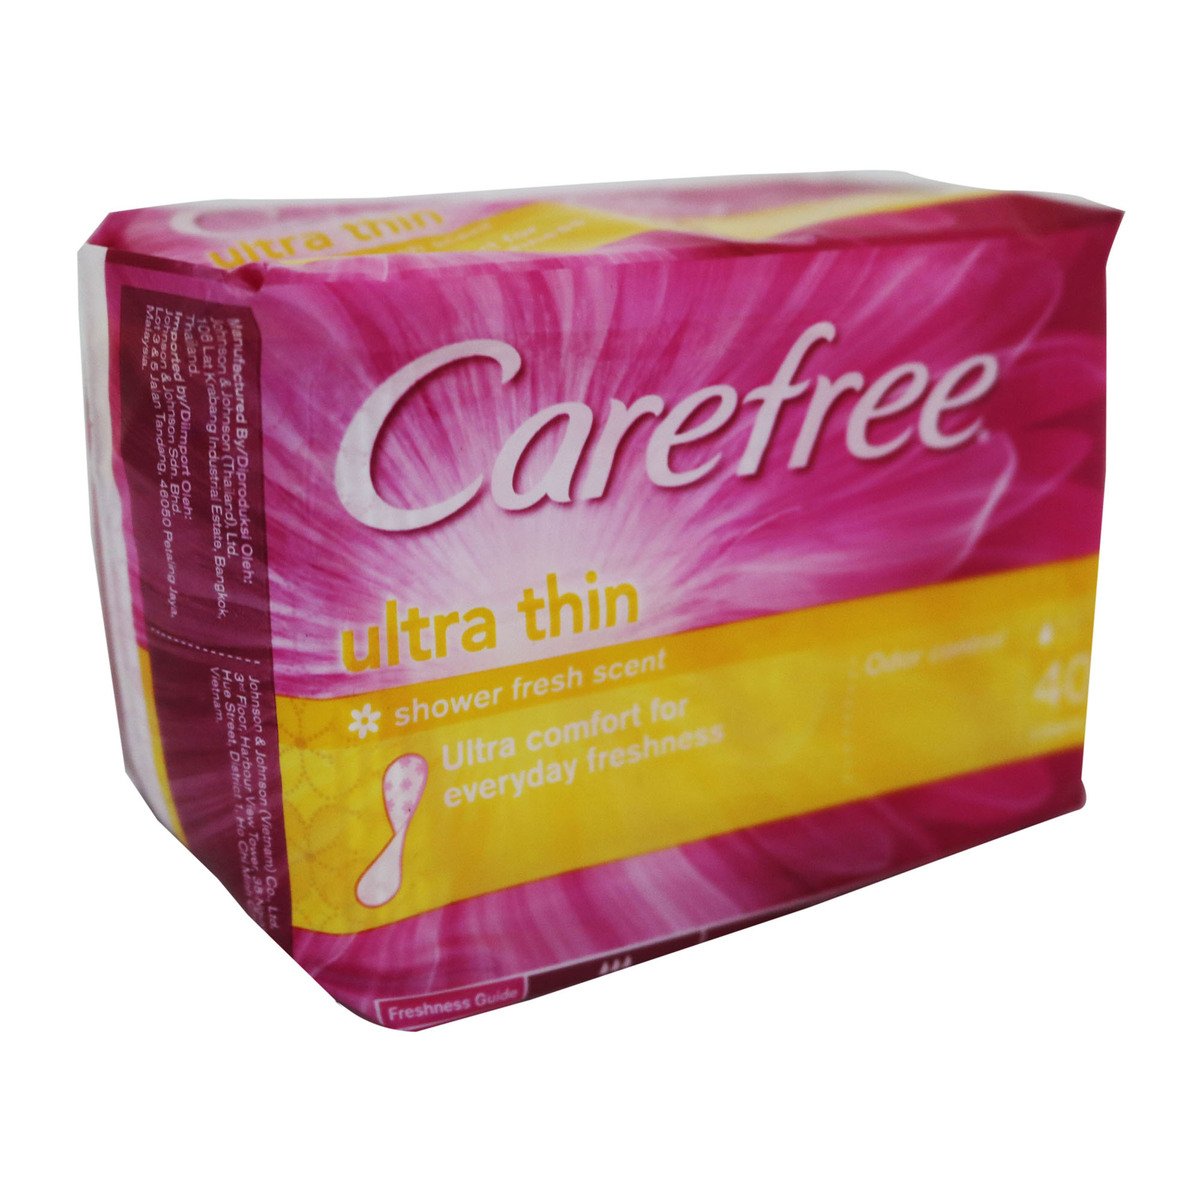 Carefree Ultra Thin Cented 40sheets